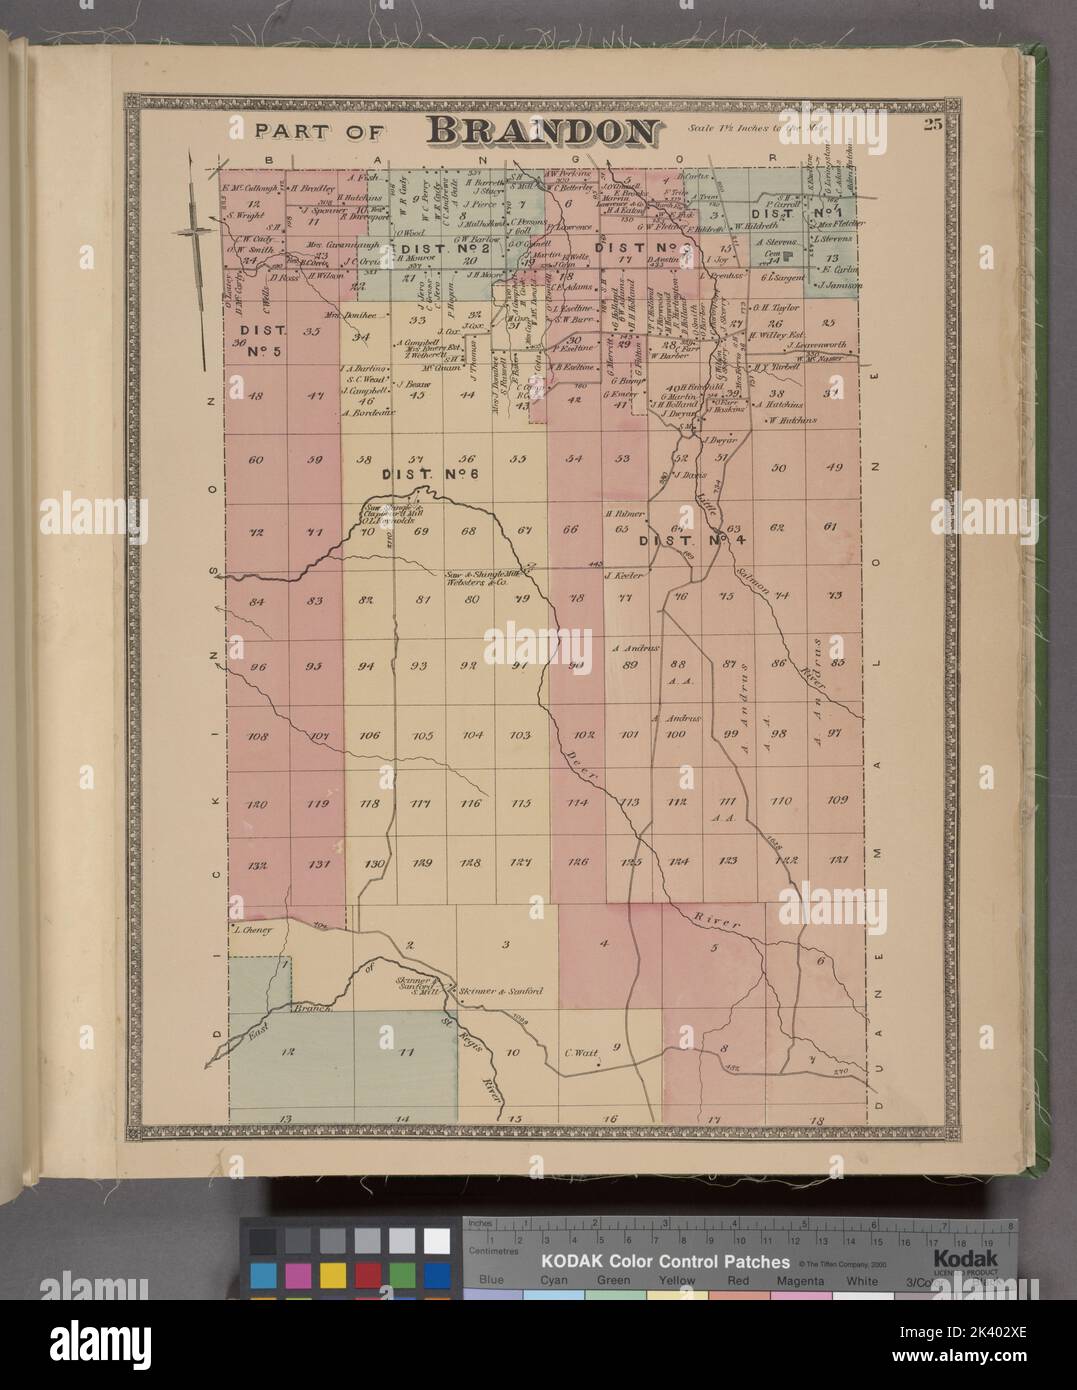 Part of Brandon Township Cartographic. Atlases, Maps. 1876. Lionel Pincus and Princess Firyal Map Division. Franklin County (N.Y.), Real property , New York (State) Stock Photo